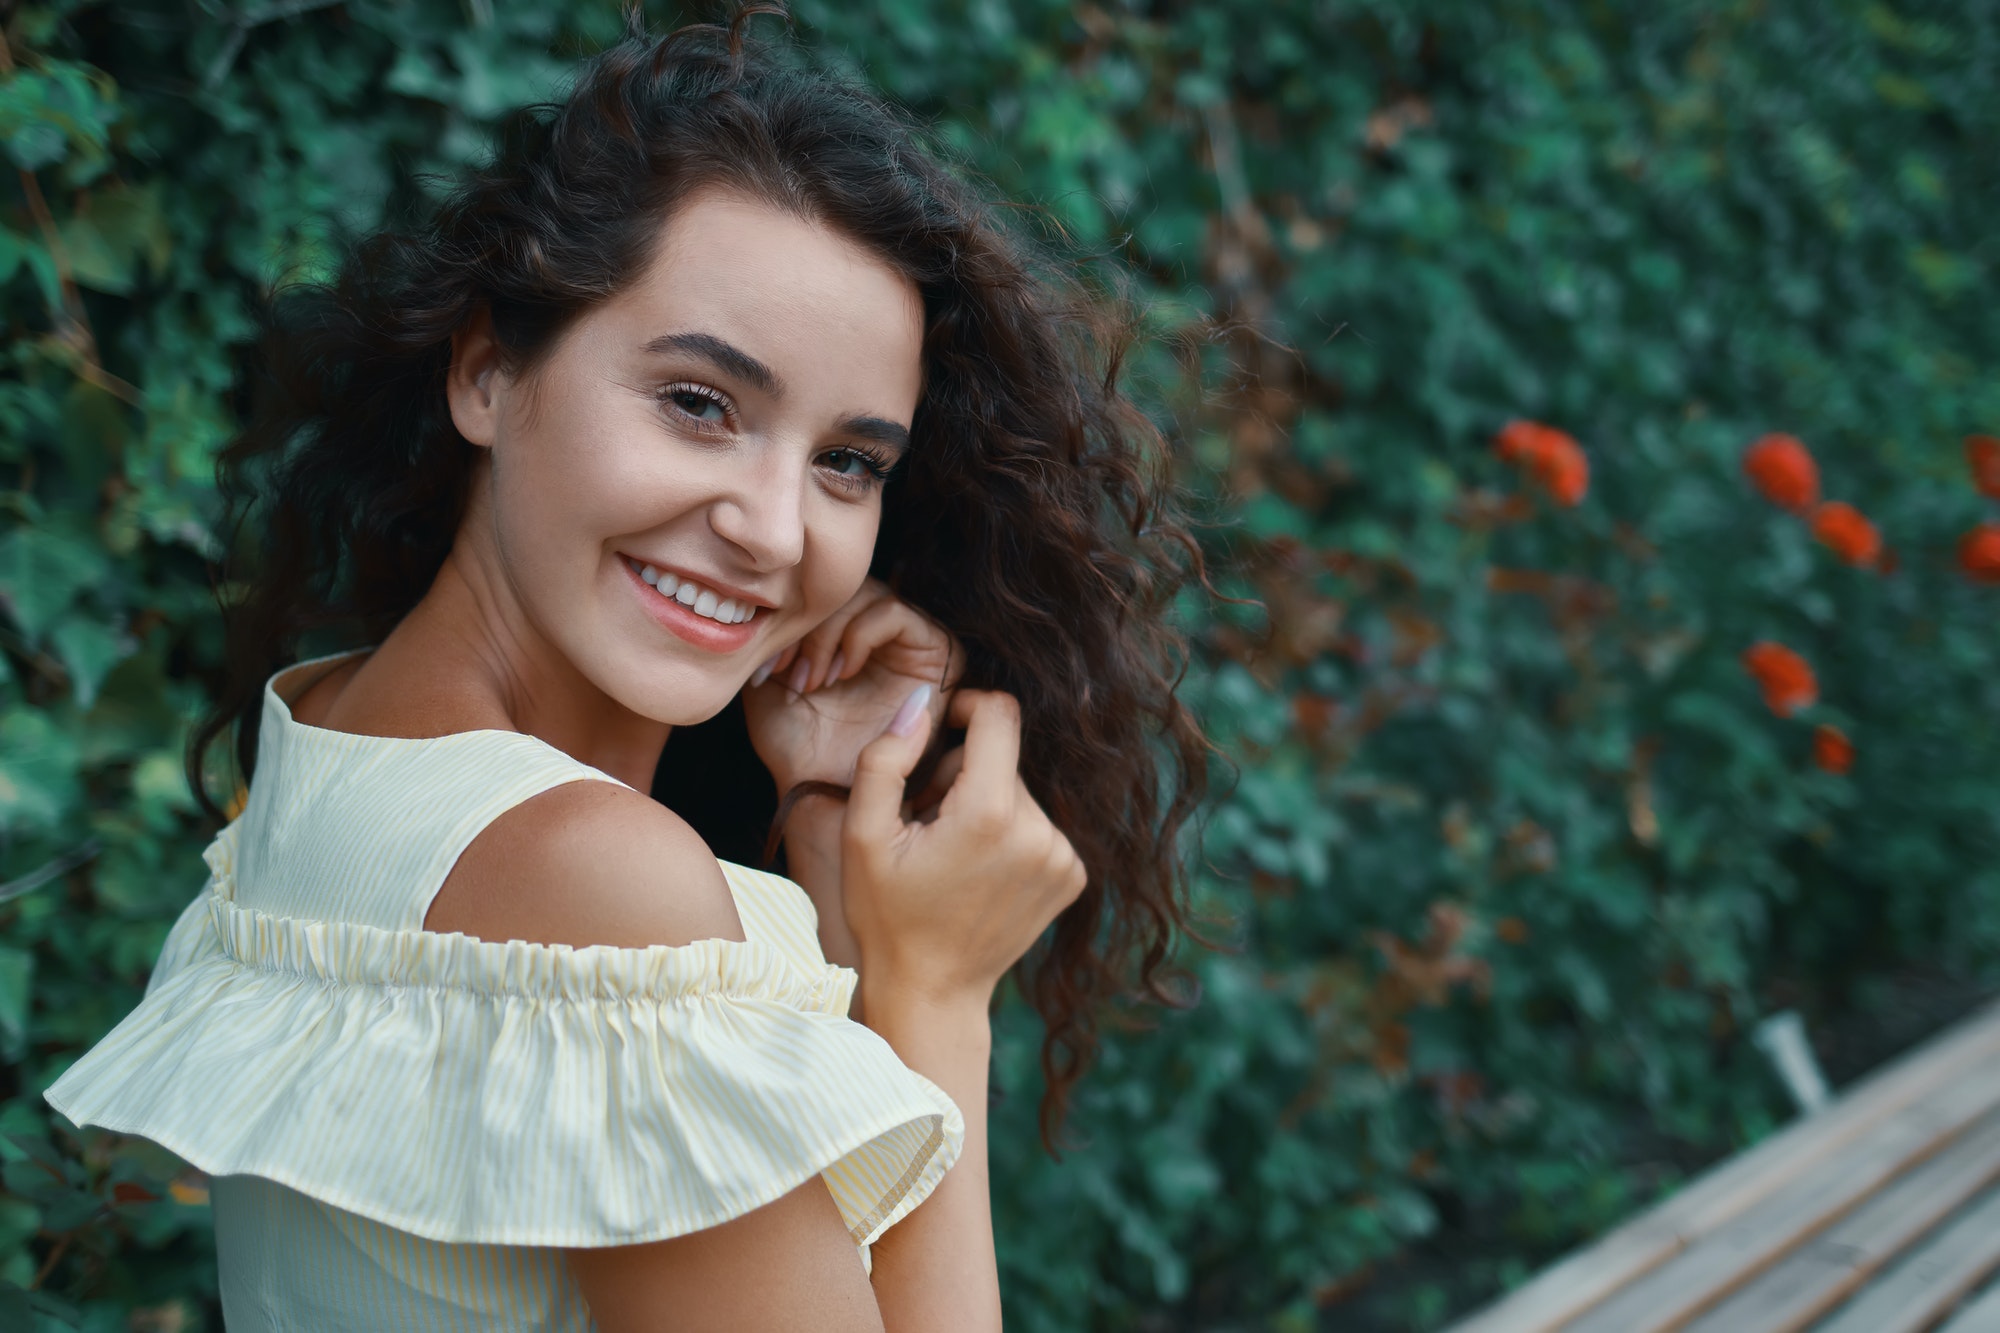 Romantic young woman with an adorable smile